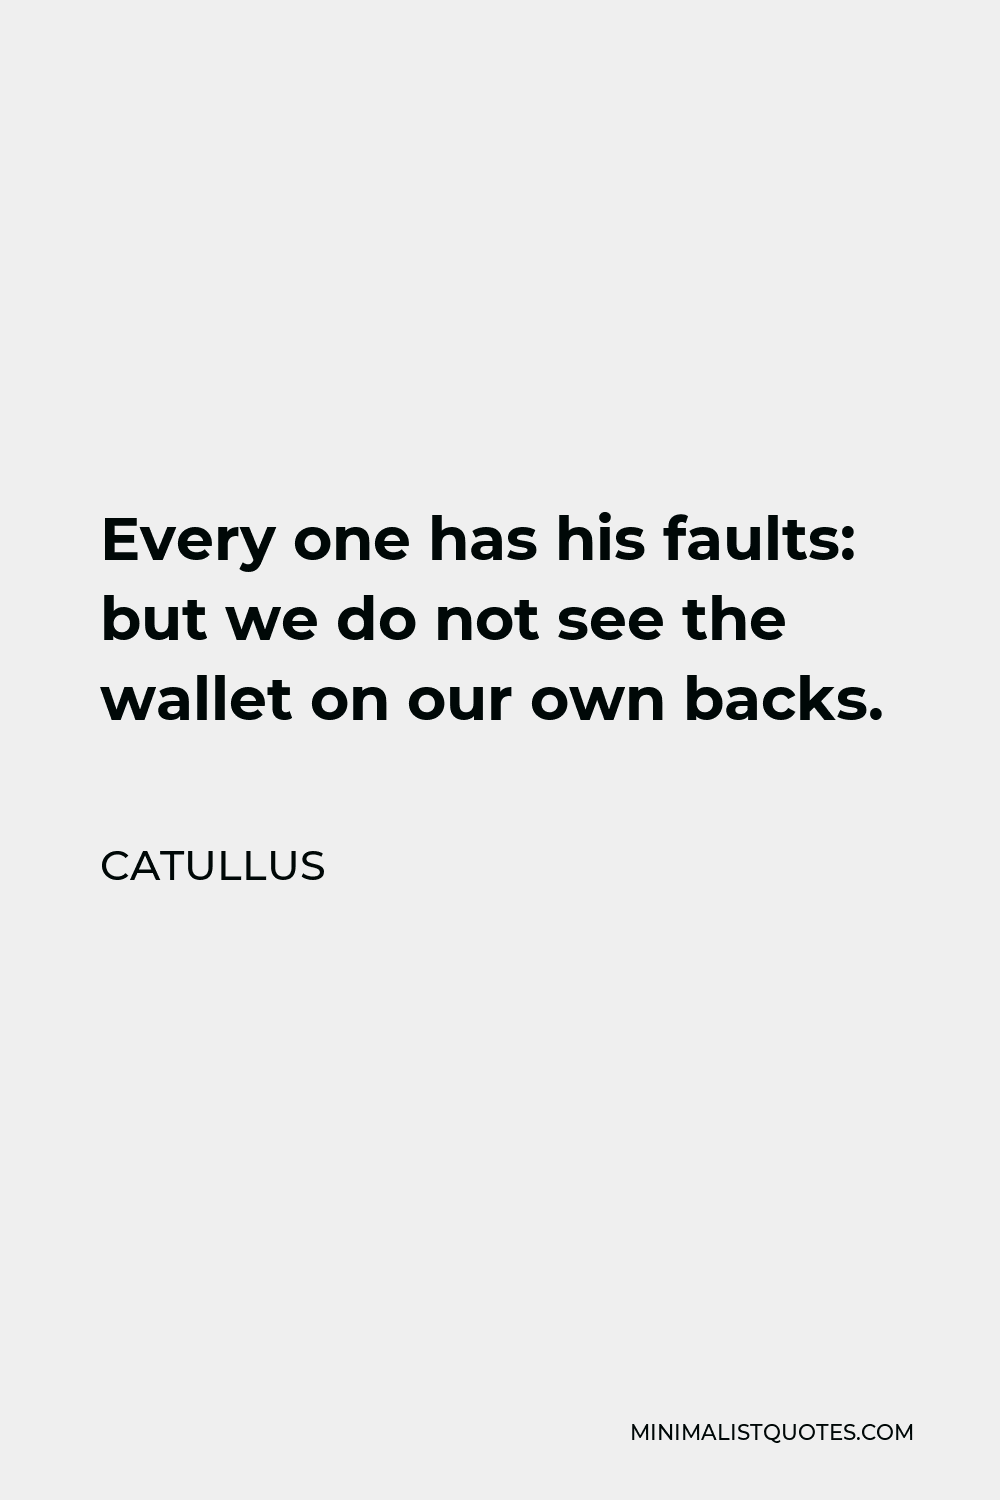 Catullus Quote - Every one has his faults: but we do not see the wallet on our own backs.